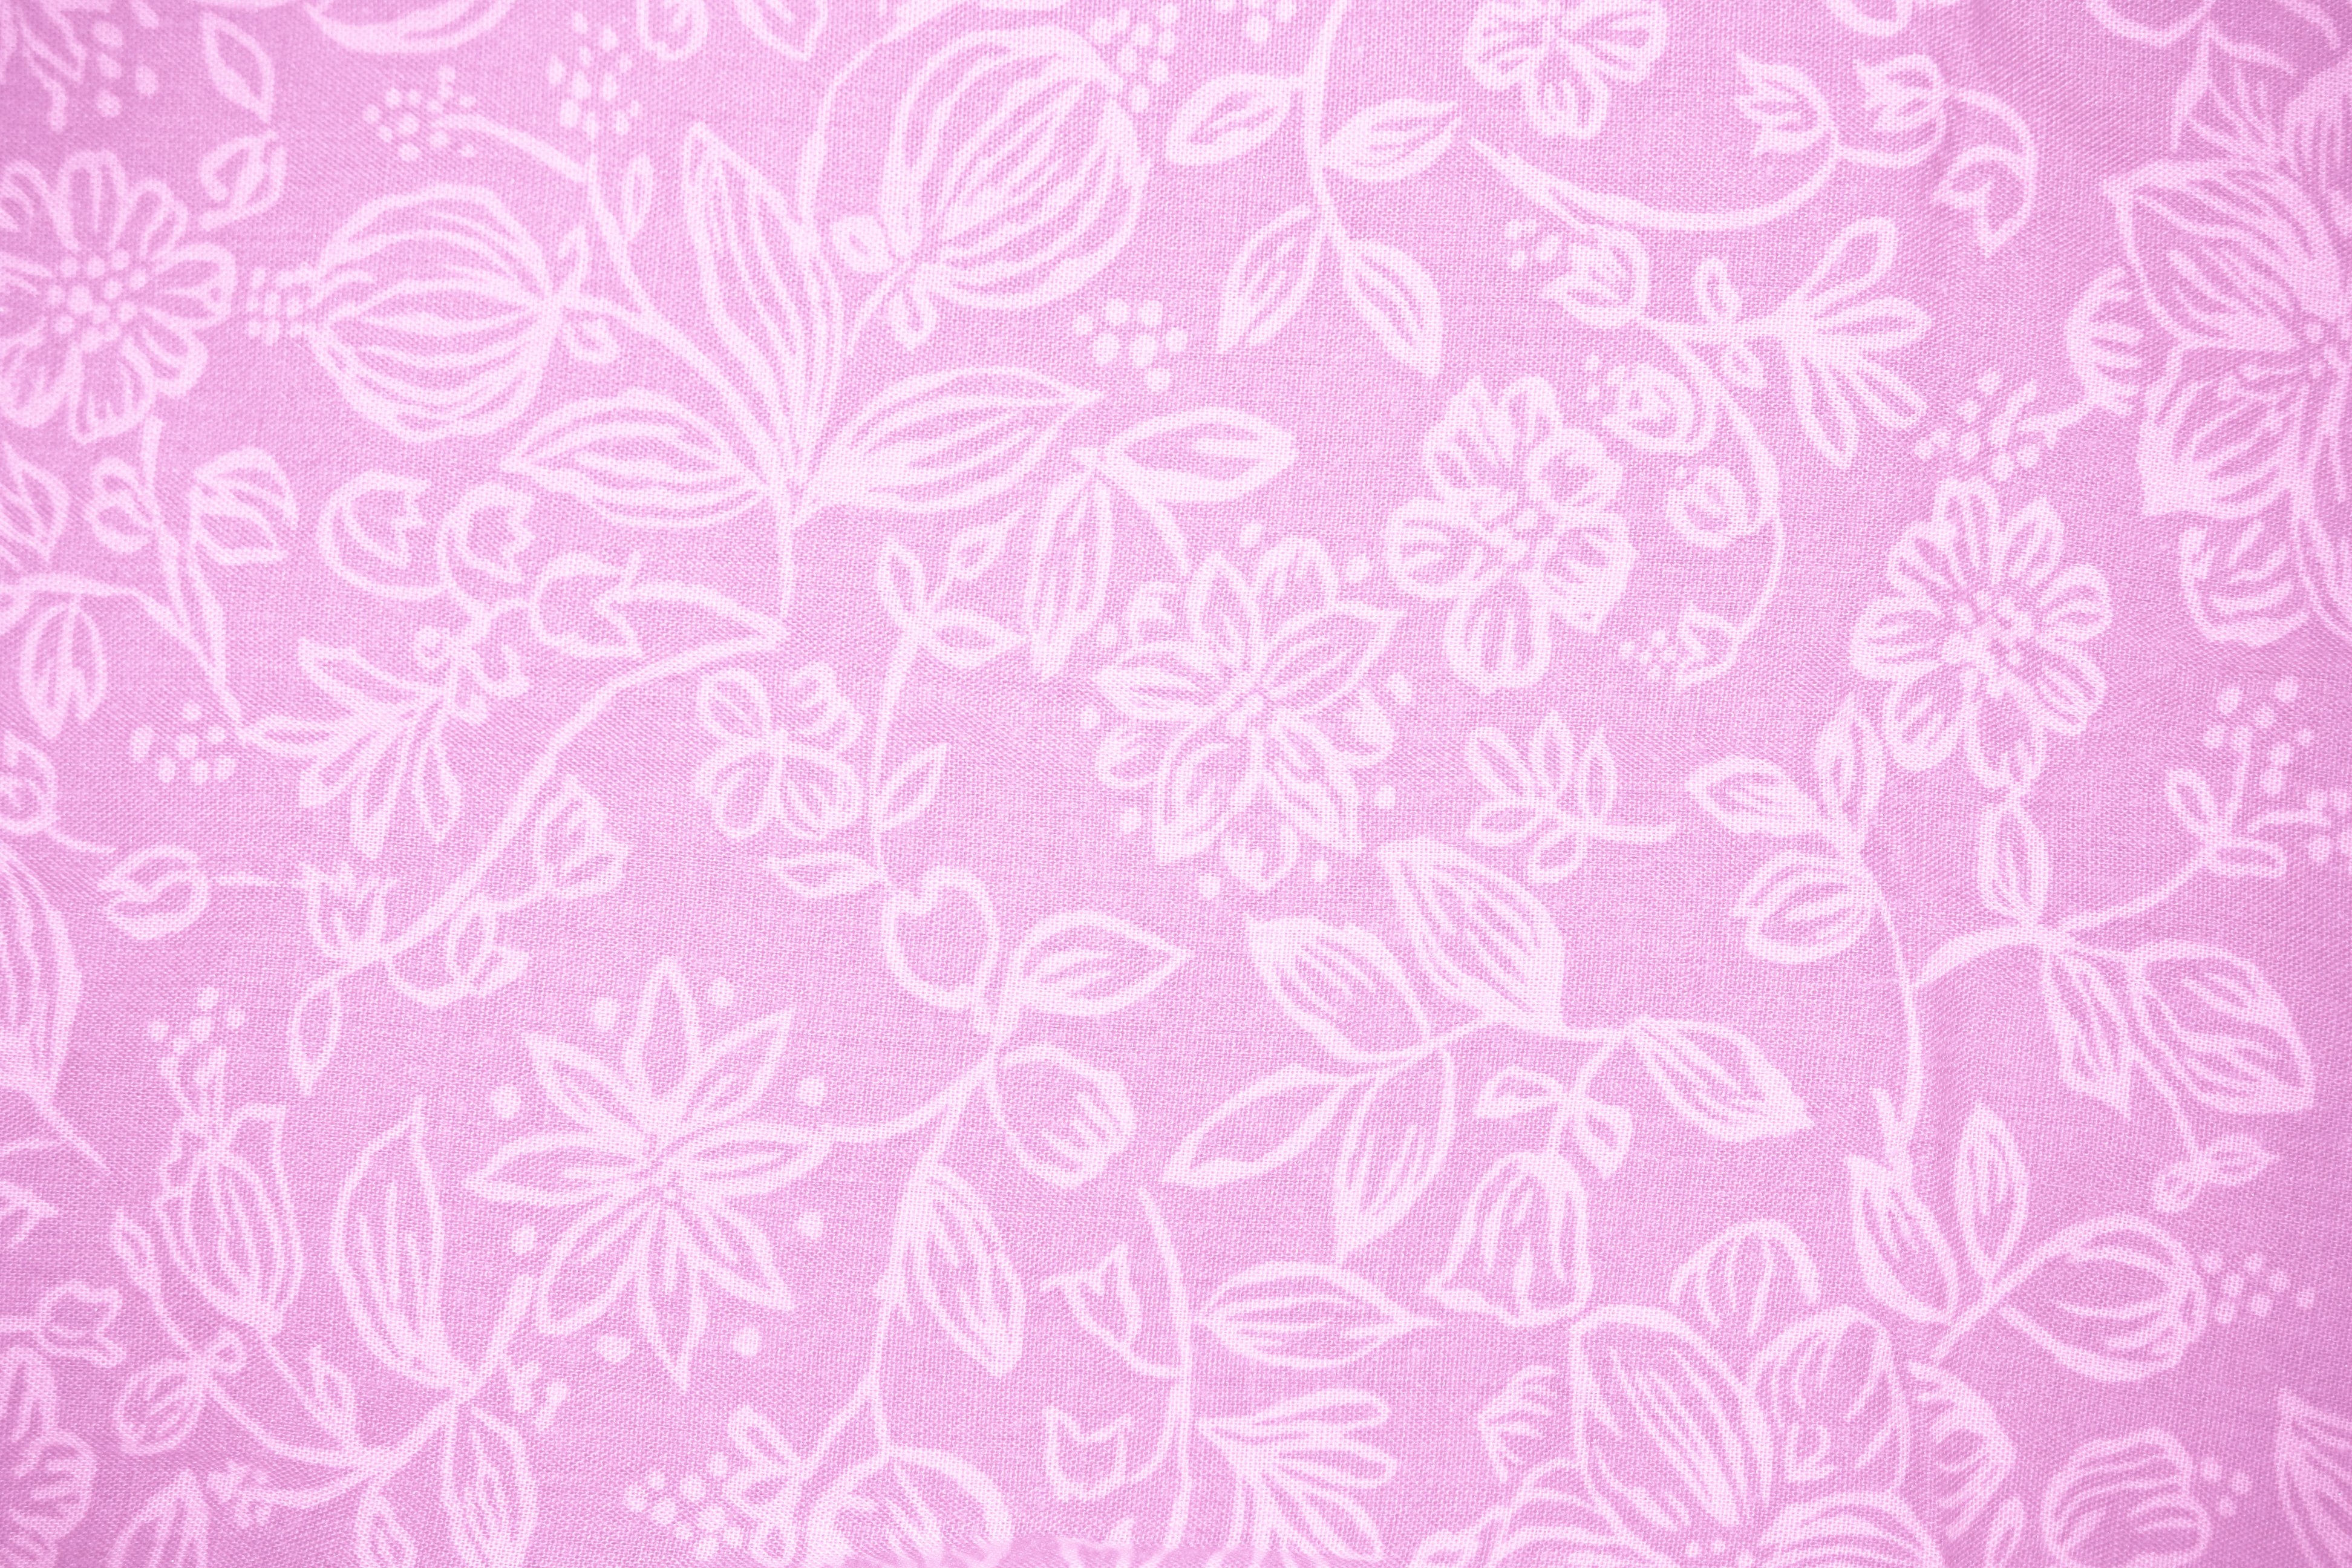 Pink Fabric with Floral Pattern Texture Picture | Free Photograph ...